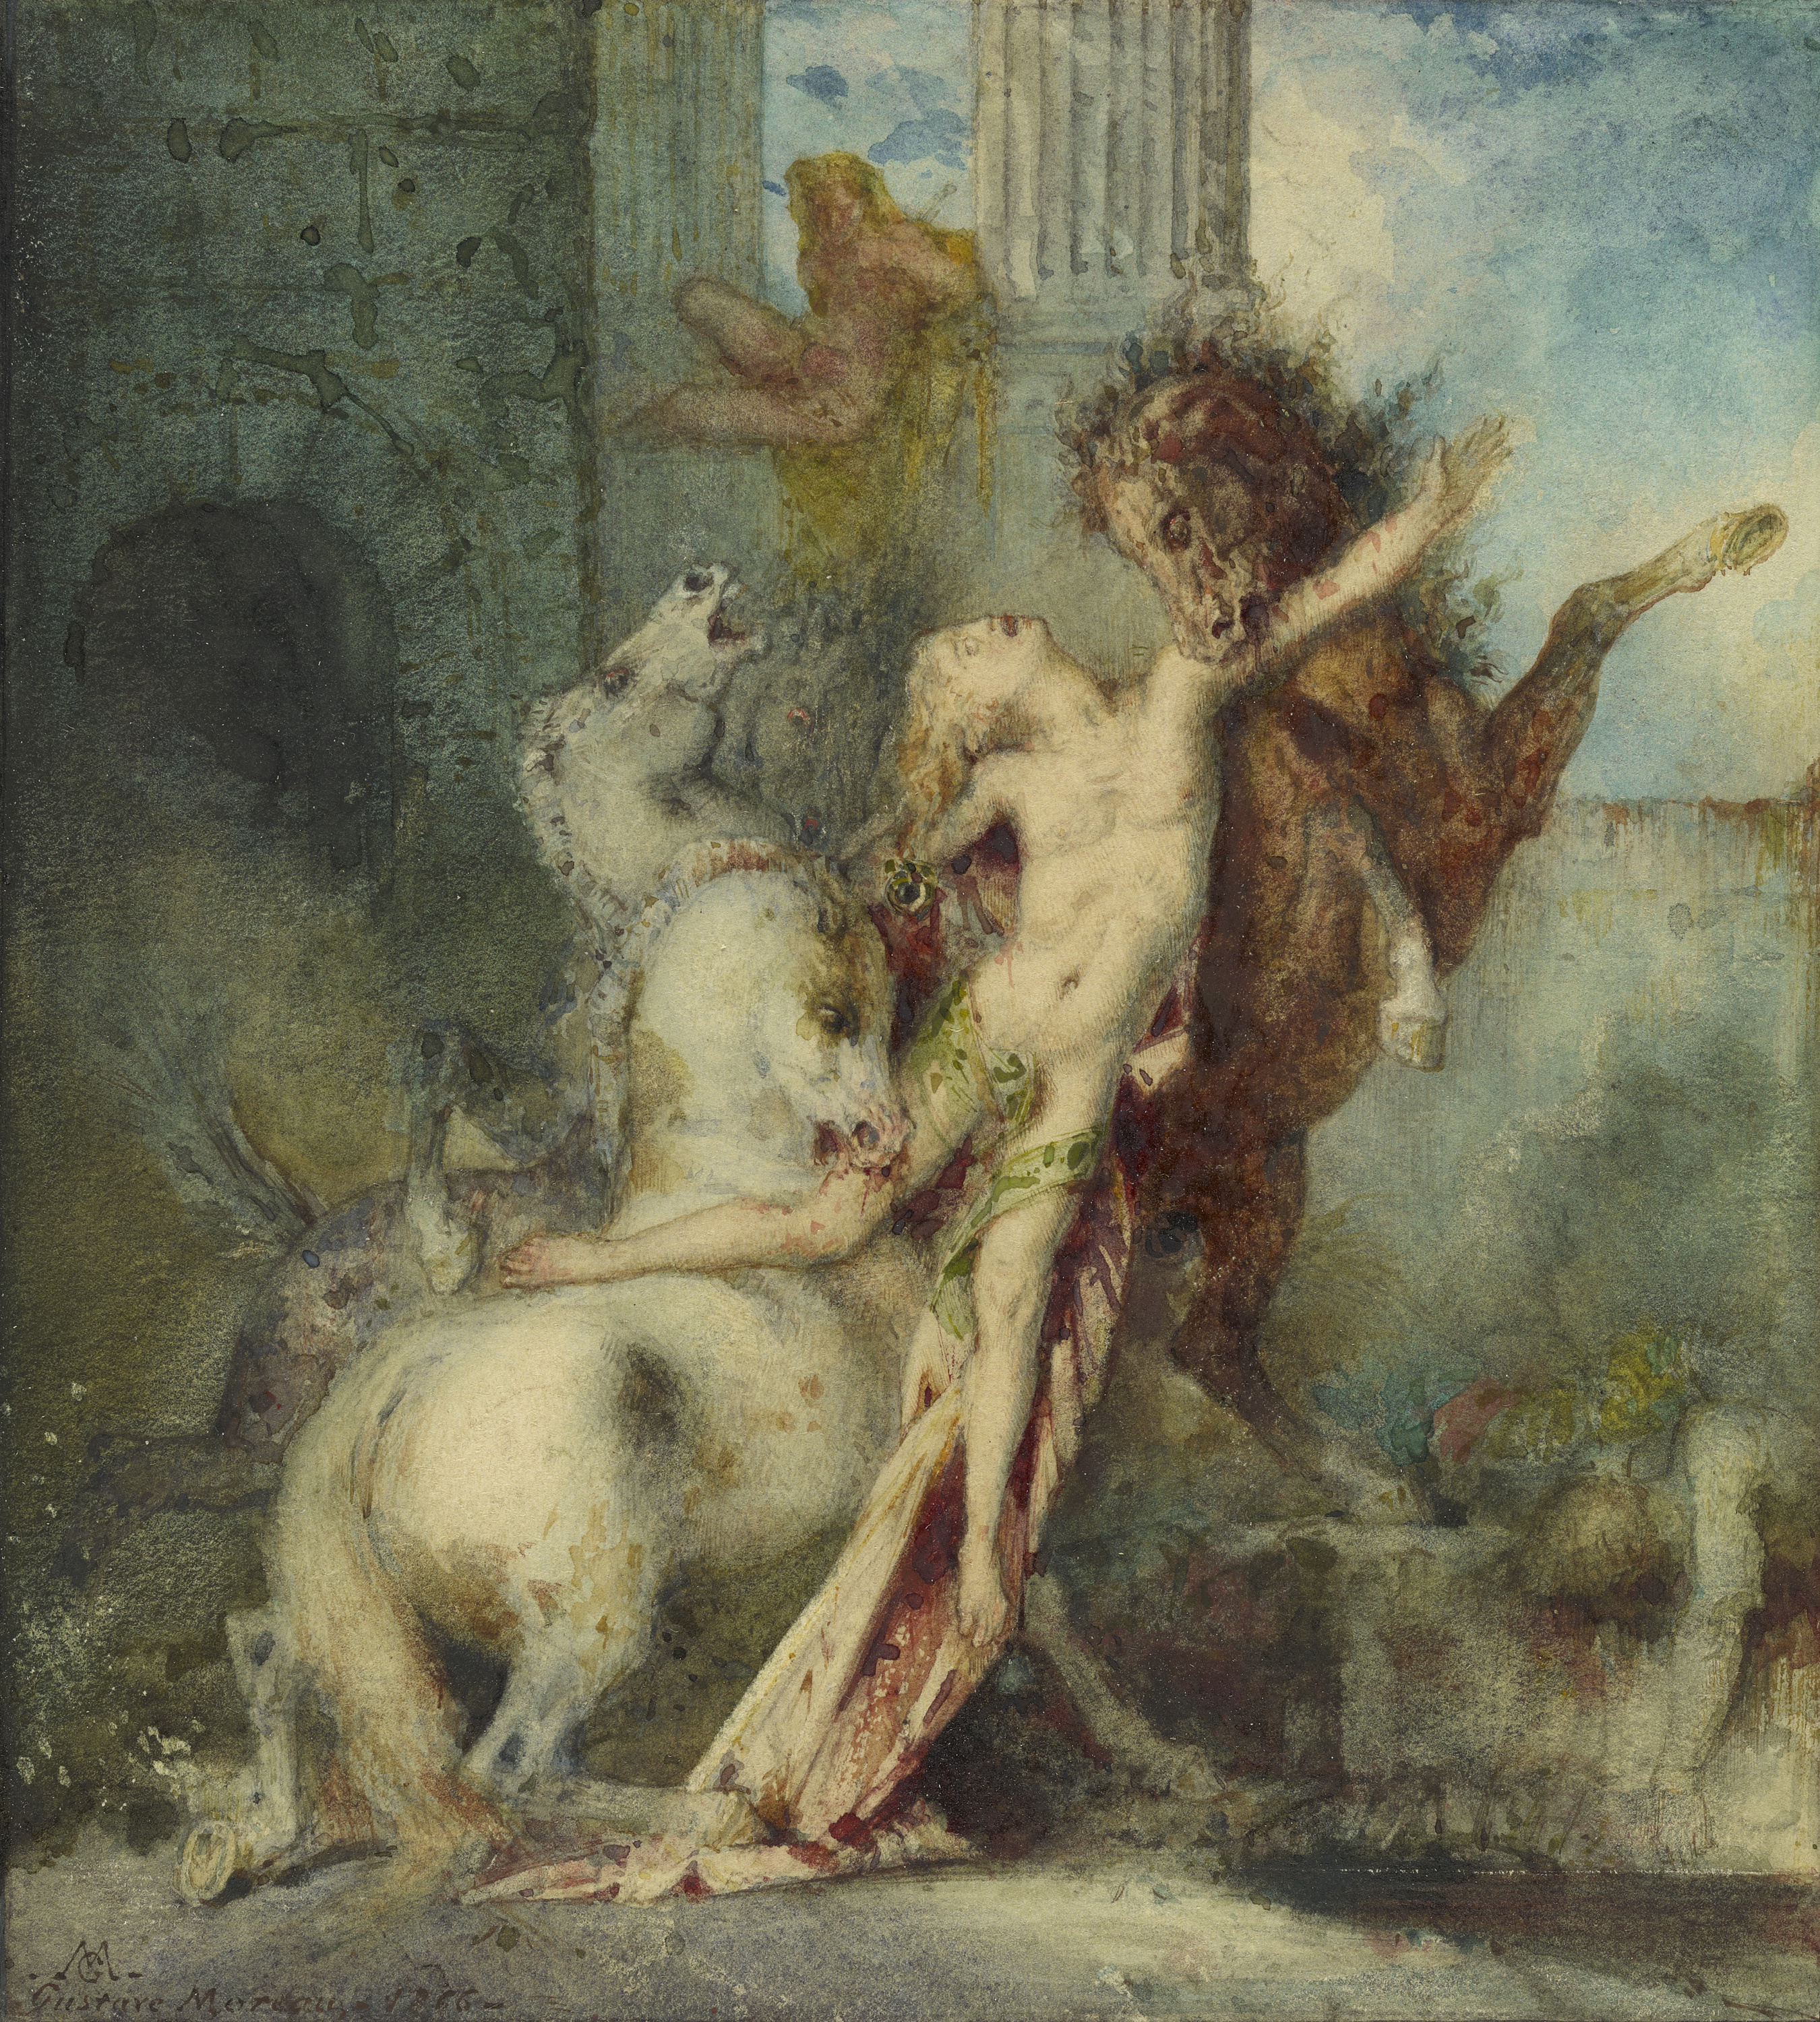 Diomedes Devoured by Horses by Gustave Moreau - 1866 - 21.4 x 19.7 cm J. Paul Getty Museum